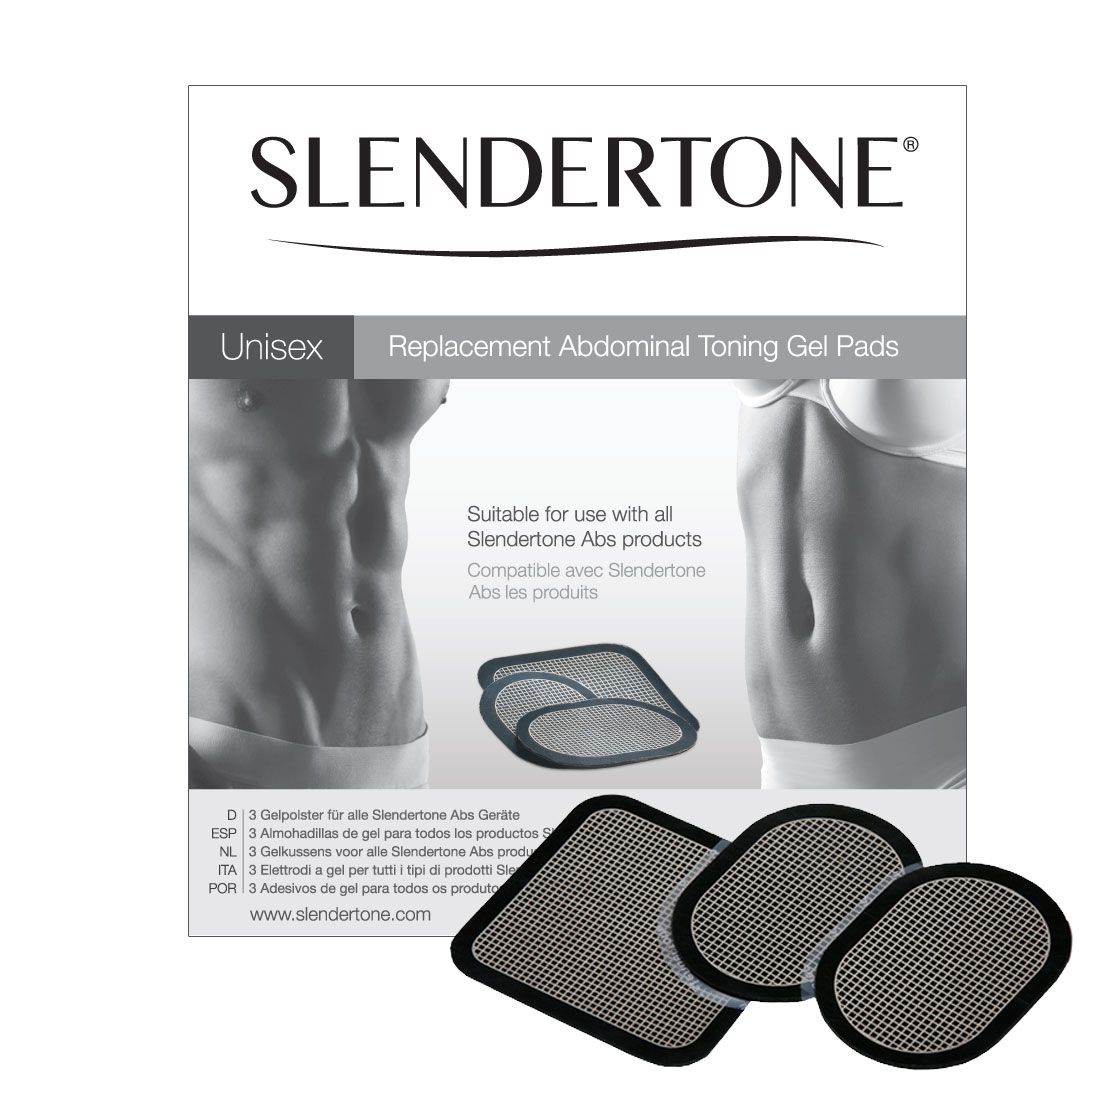  Slendertone Electrodes Abs8, Abs7, Abs6, Abs5, Connect Abs, et Abs3.